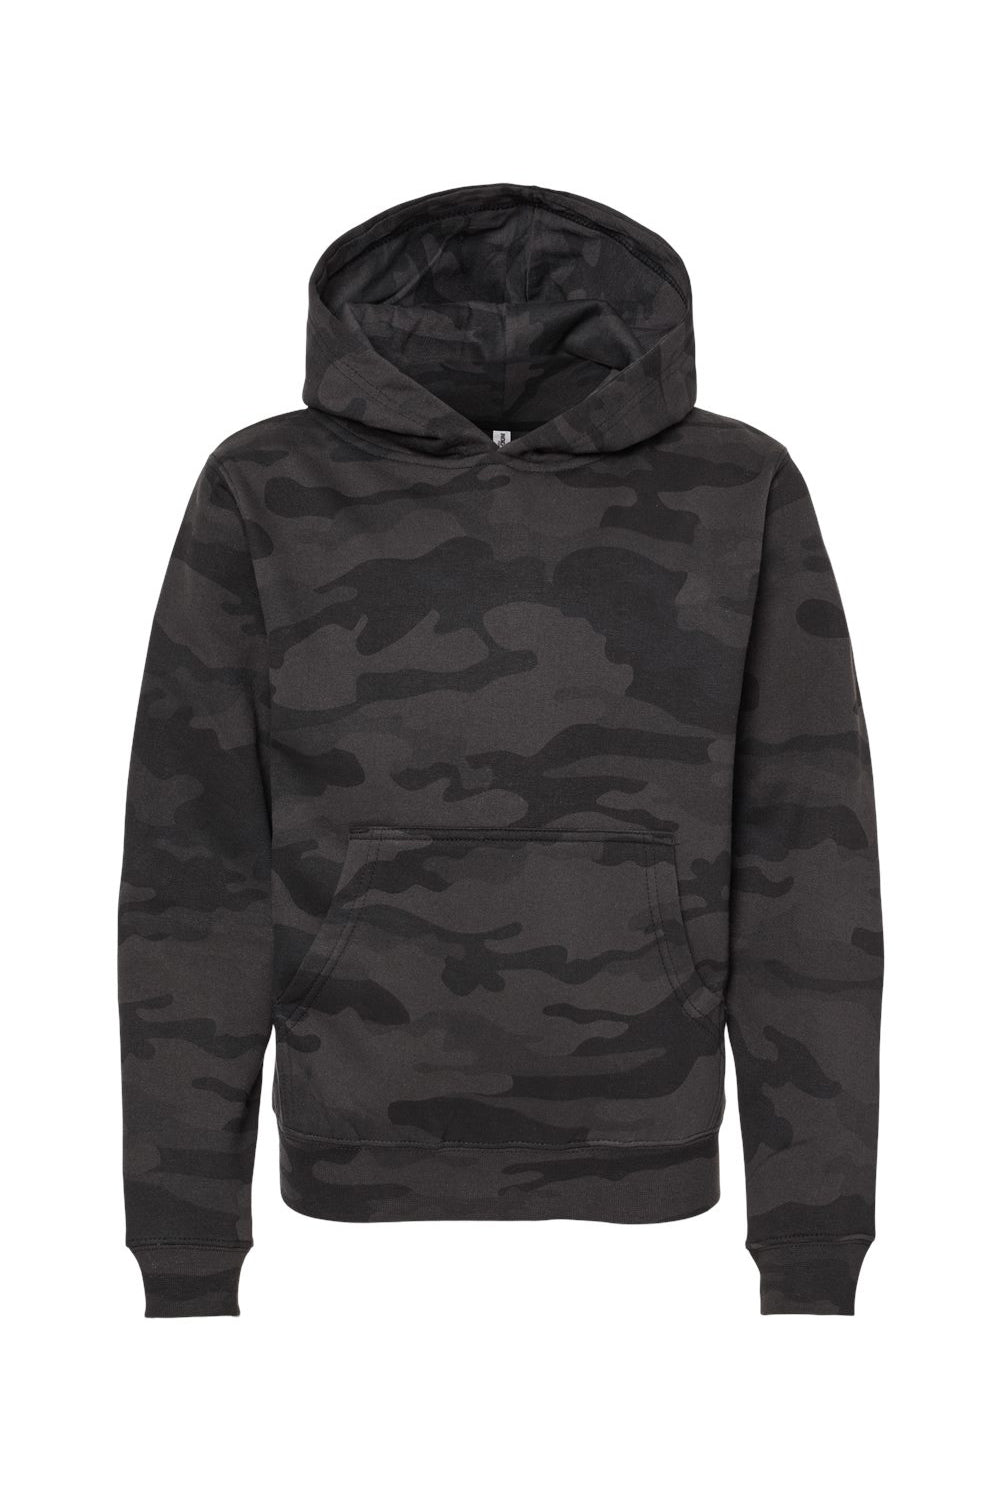 Independent Trading Co. SS4001Y Youth Hooded Sweatshirt Hoodie Black Camo Flat Front